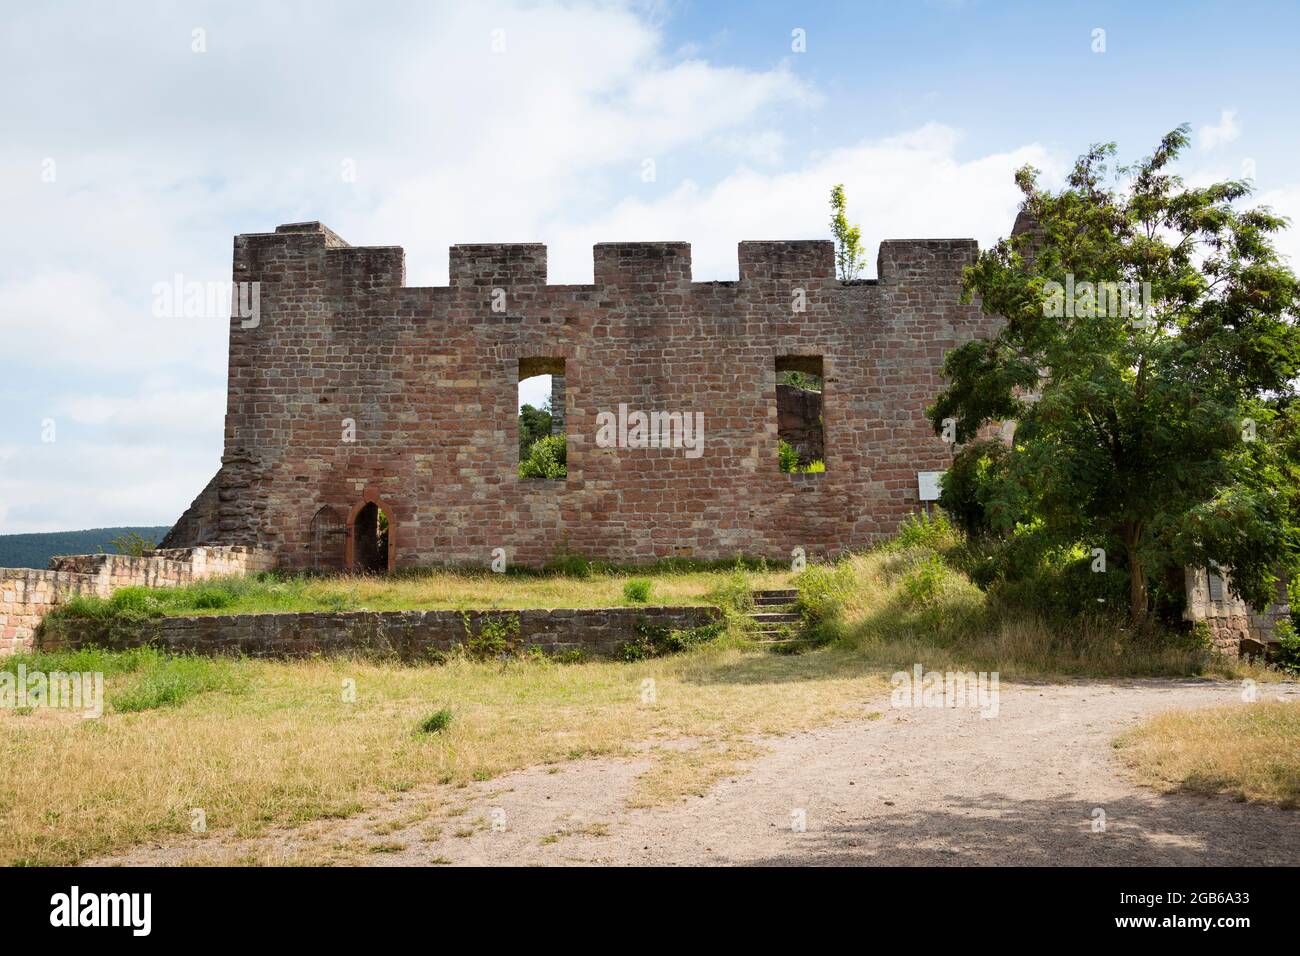 geography / travel, Germany, Rhineland-Palatinate, new town at the Wine Route, Wolfsburg, castle ruin, ADDITIONAL-RIGHTS-CLEARANCE-INFO-NOT-AVAILABLE Stock Photo